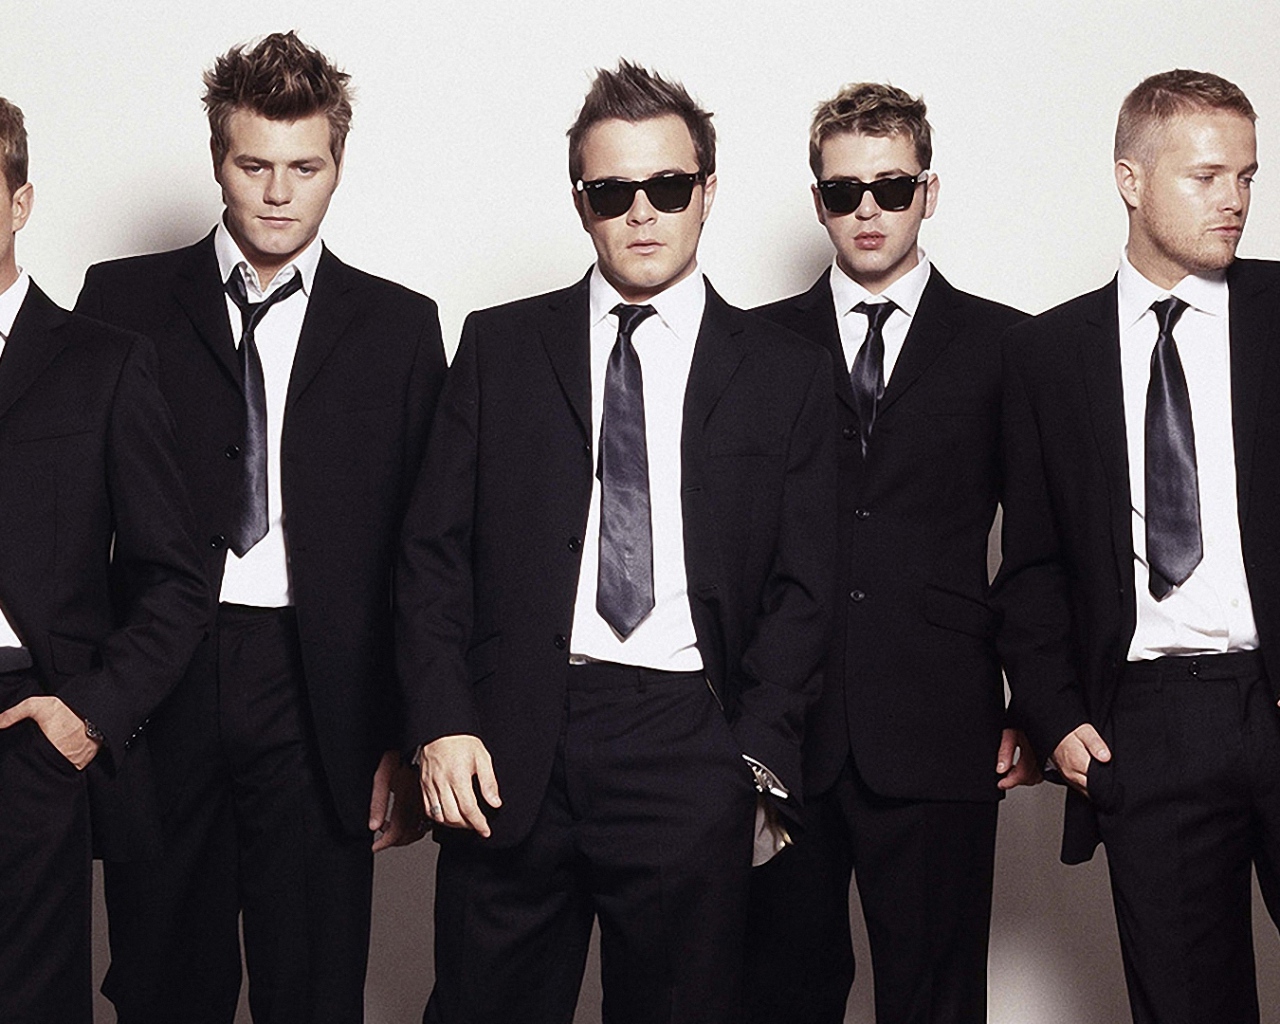 Westlife Suits Ties Glasses Band Wallpaper Background